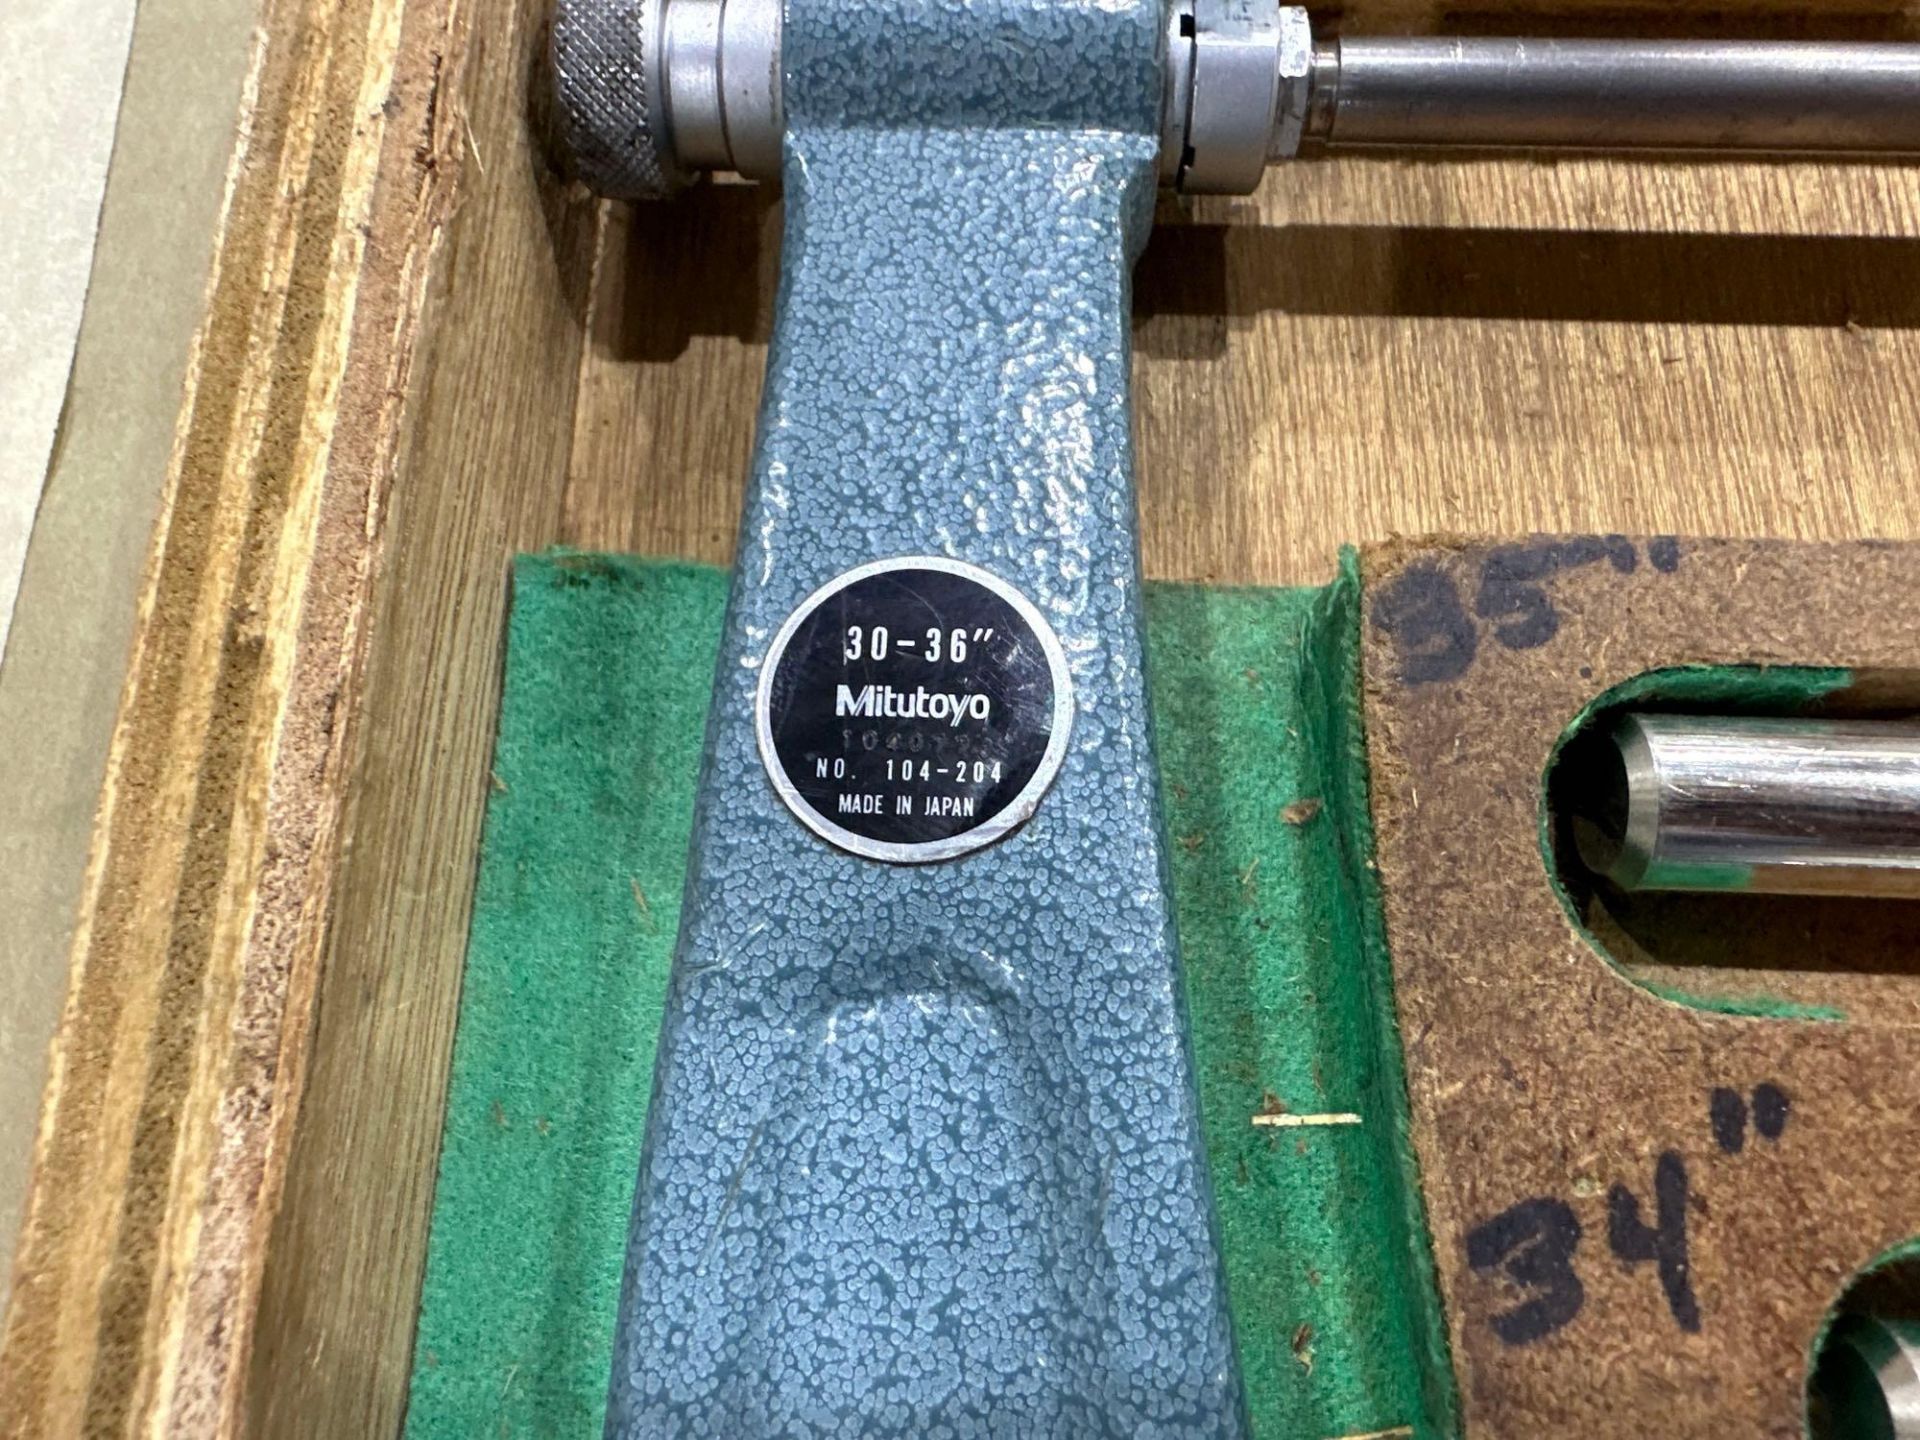 Mitutoyo OD Micrometer Set No. 104-204, Range 30" - 36" with interchangeable anvils, in wood case - Image 4 of 9